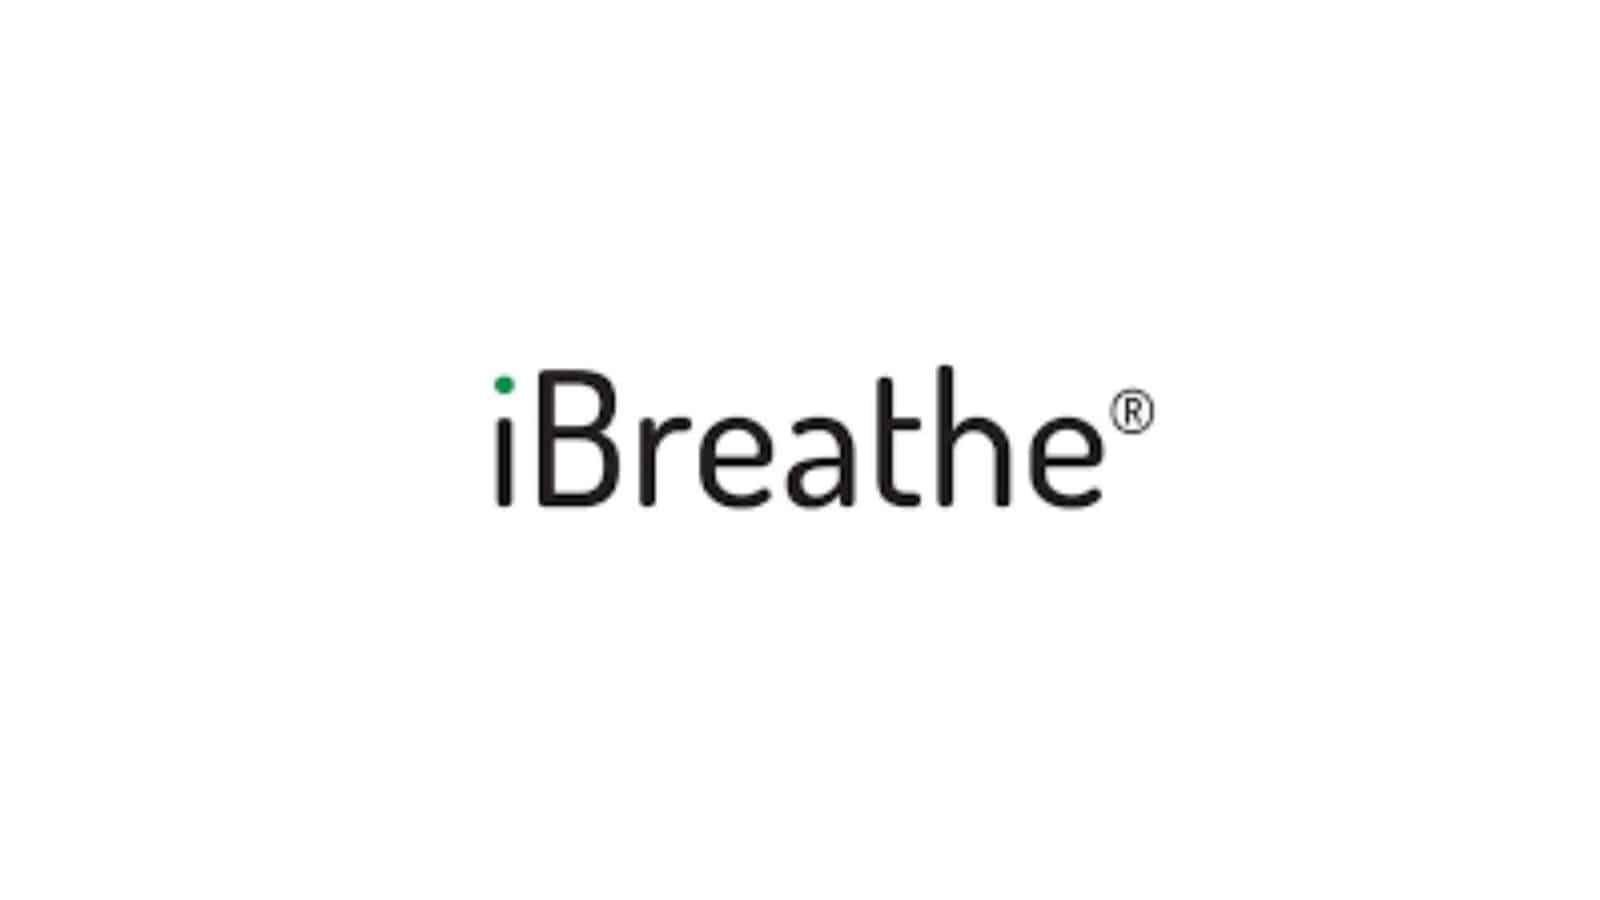 <p><a href="https://apps.apple.com/us/app/ibreathe-relax-and-breathe/id1296605806" rel="noopener external noreferrer">iBreathe</a>is explicitly designed to help manage stress. It offers simple and intuitive exercises that users can access anytime, anywhere to relax and alleviate stress. By incorporating iBreathe into their daily routine, users can effectively manage stress levels, enhance emotional resilience, and improve overall mental health. Embrace the digital revolution in mental health care with iBreathe, your reliable companion in the journey towards stress-free living.</p>